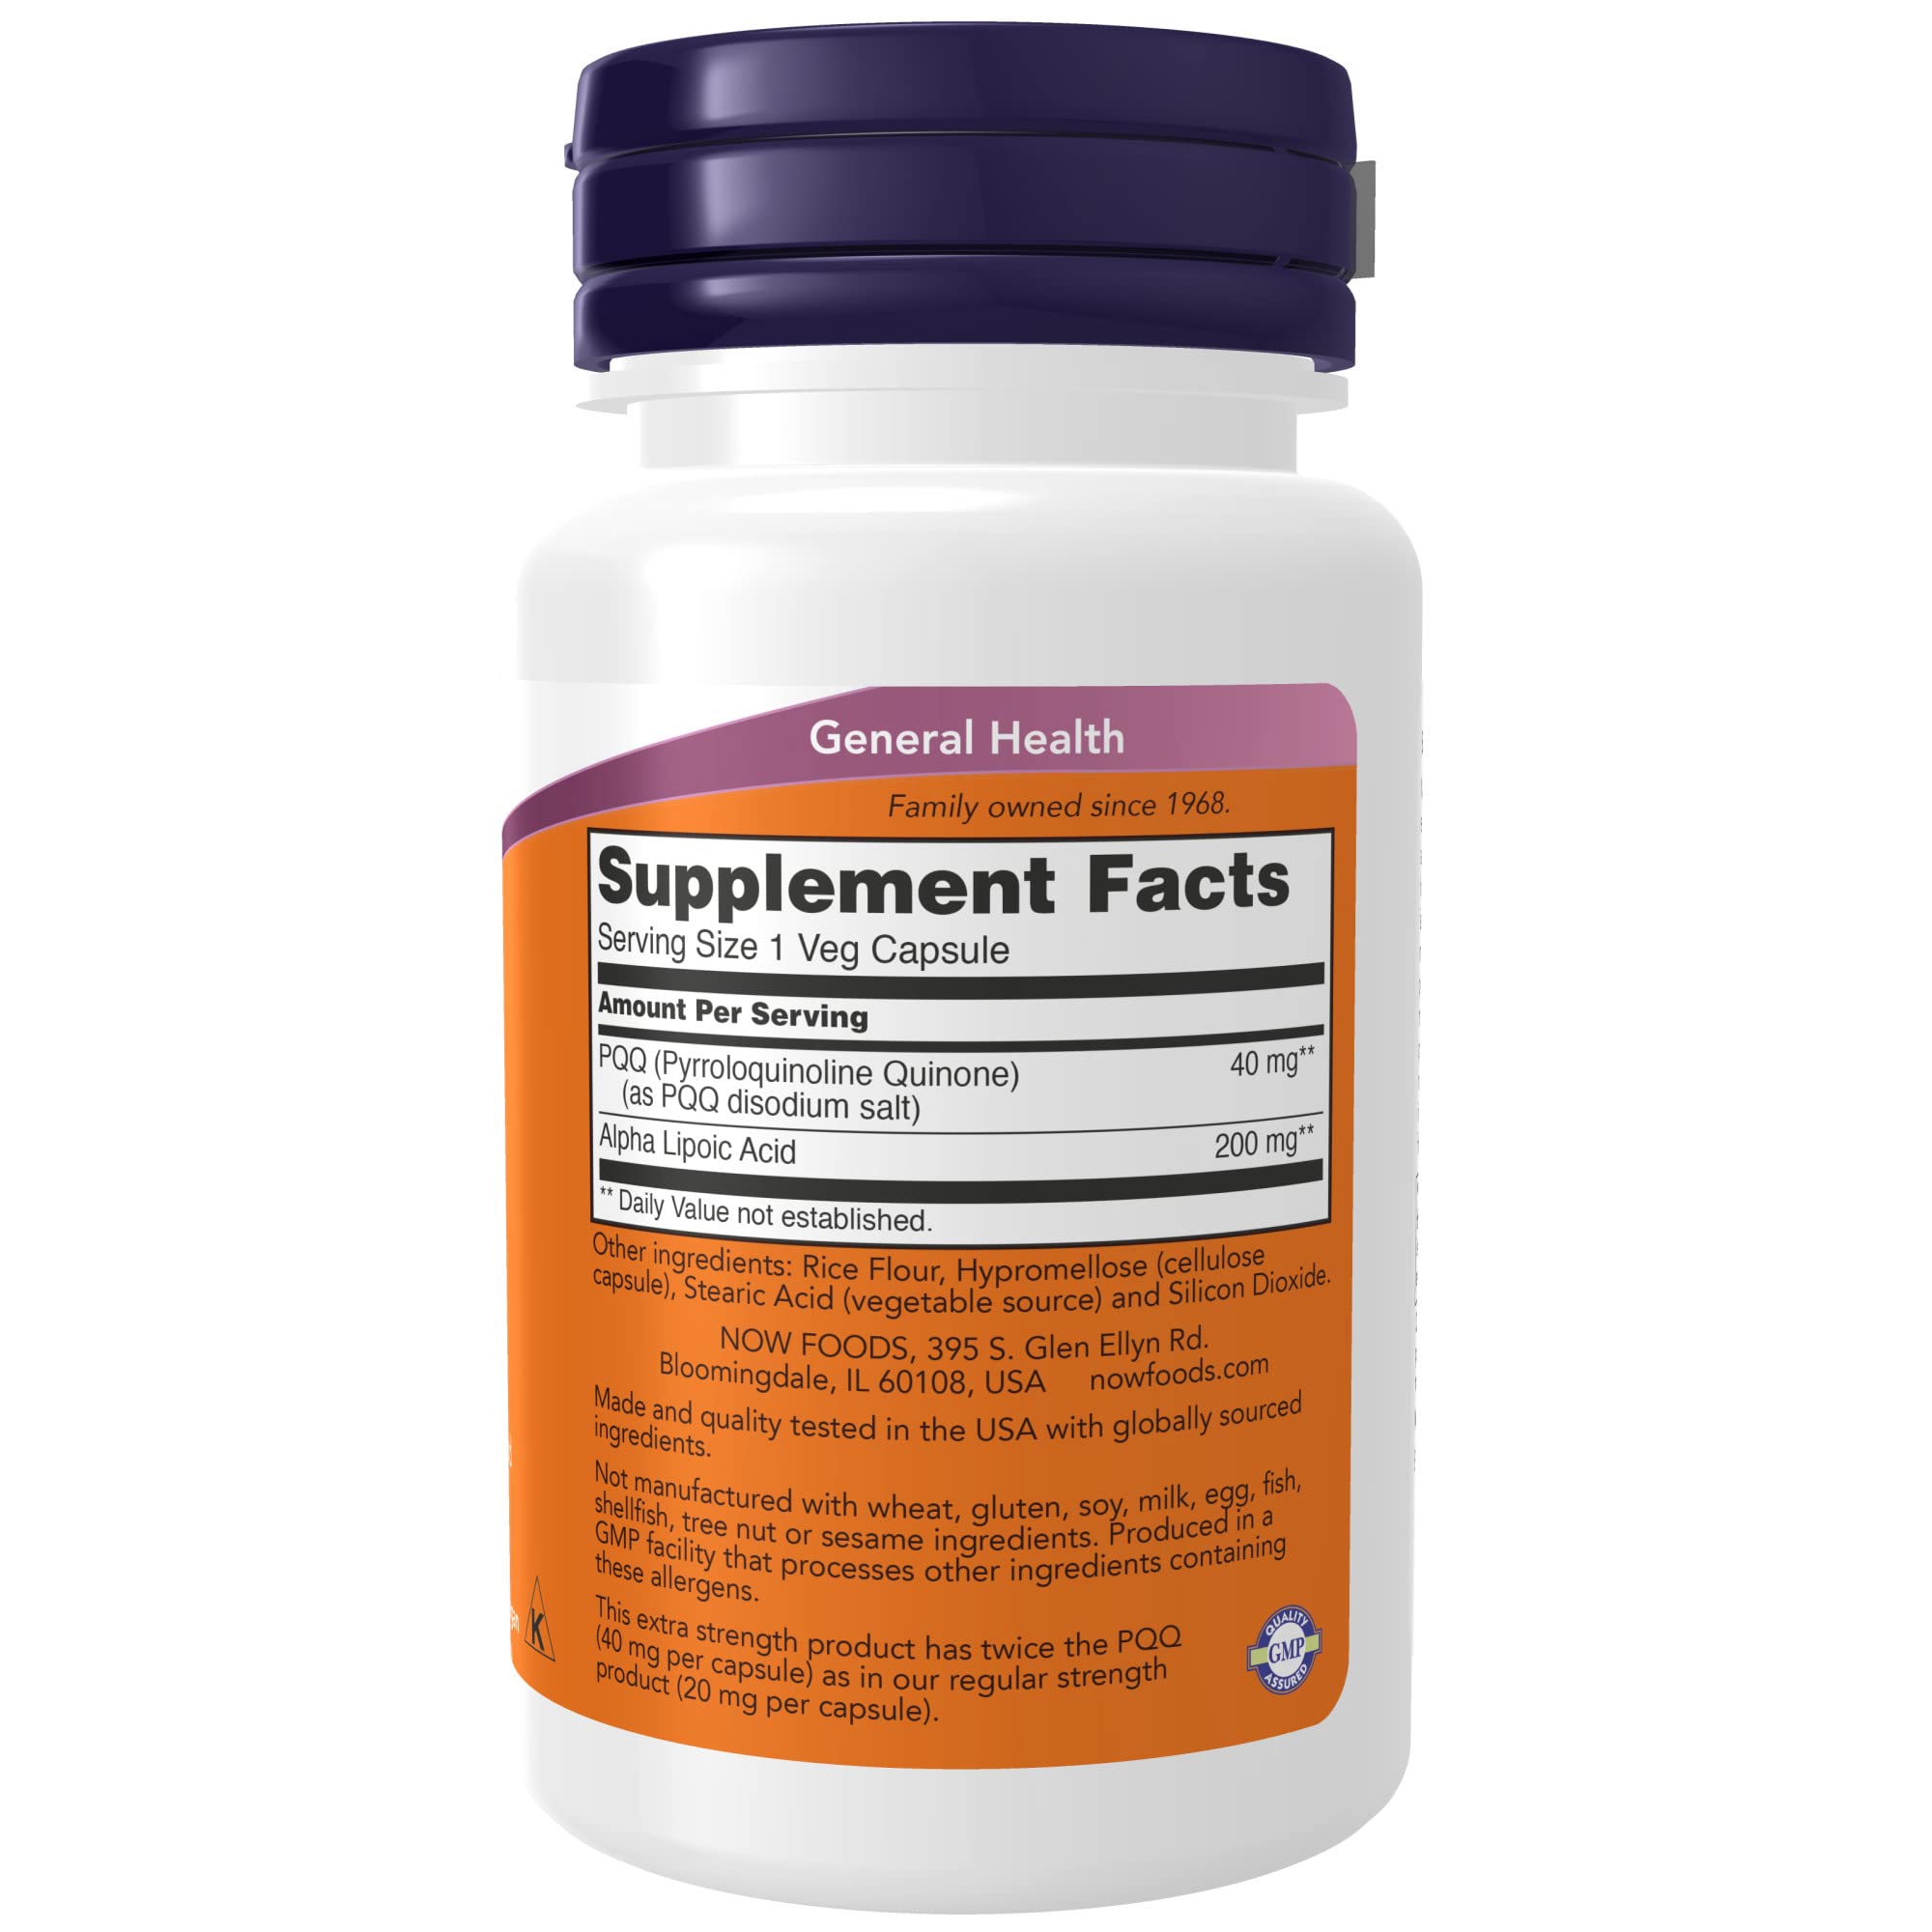 NOW Supplements, PQQ 40 mg with 200 mg Alpha Lipoic Acid, Extra Strength, 50 Veg Capsules